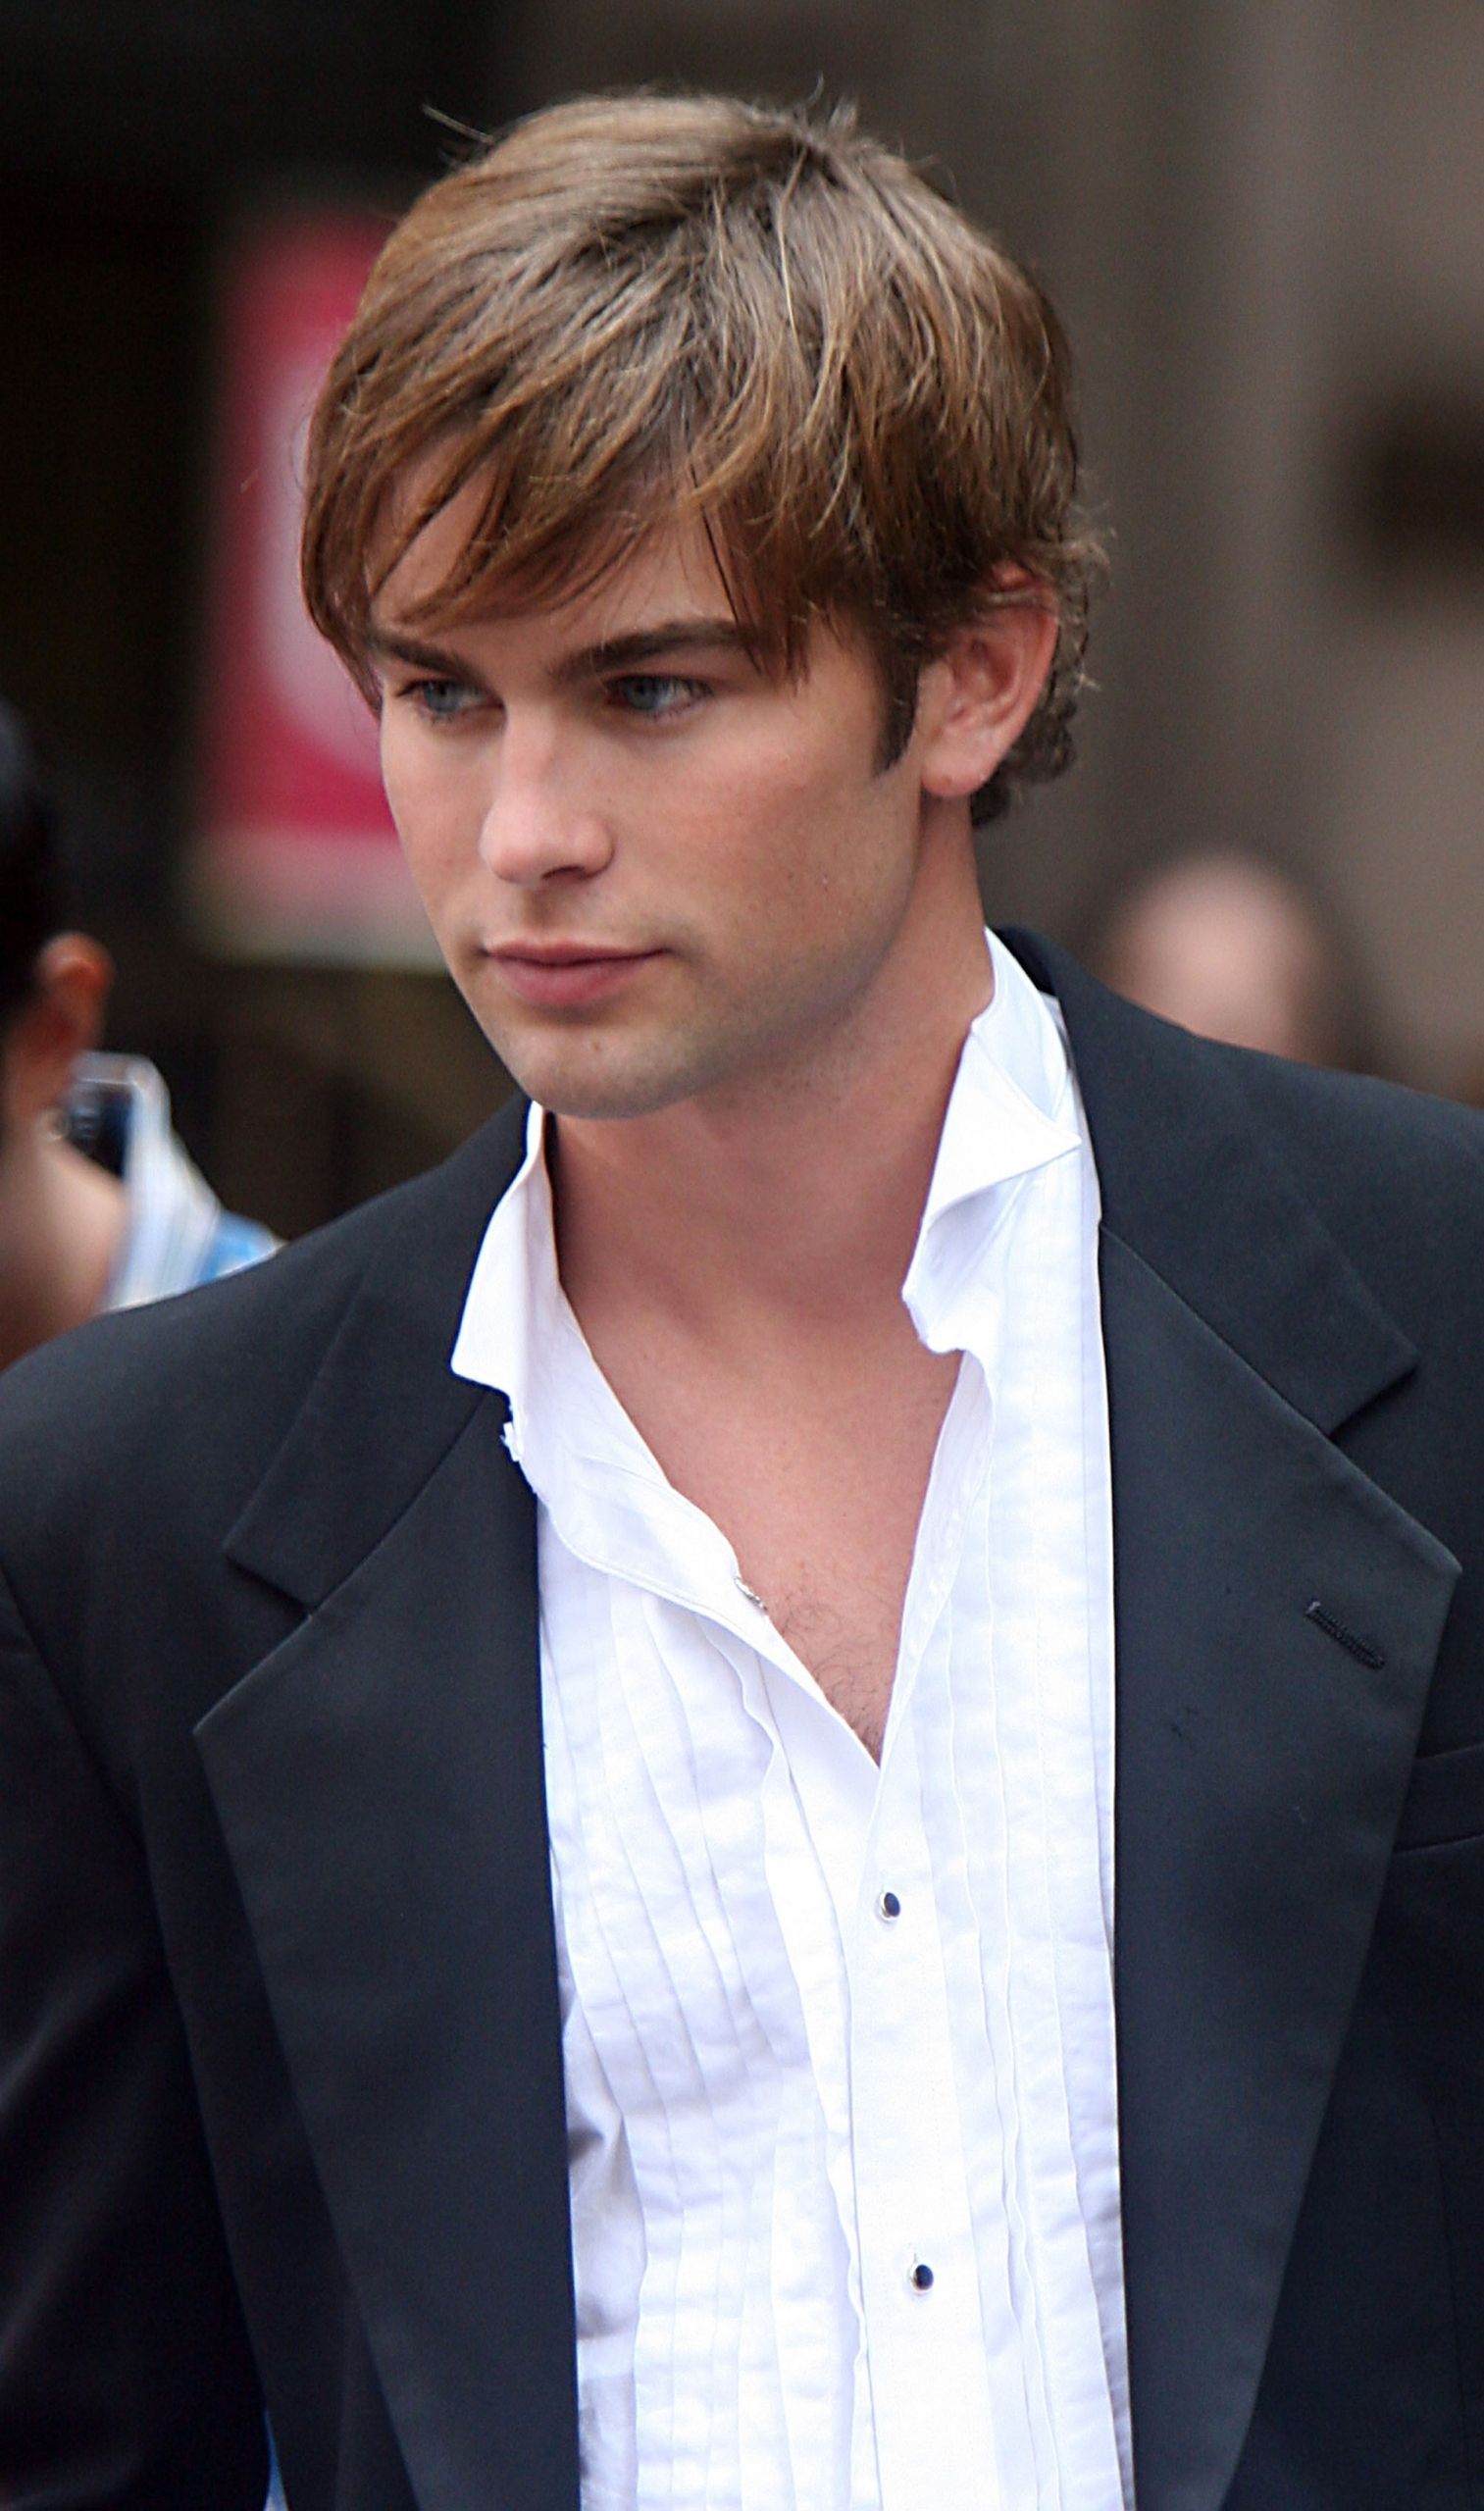 Chace Crawford Photo: Chace. Gossip girl nate, Gossip girl, Chace crawford